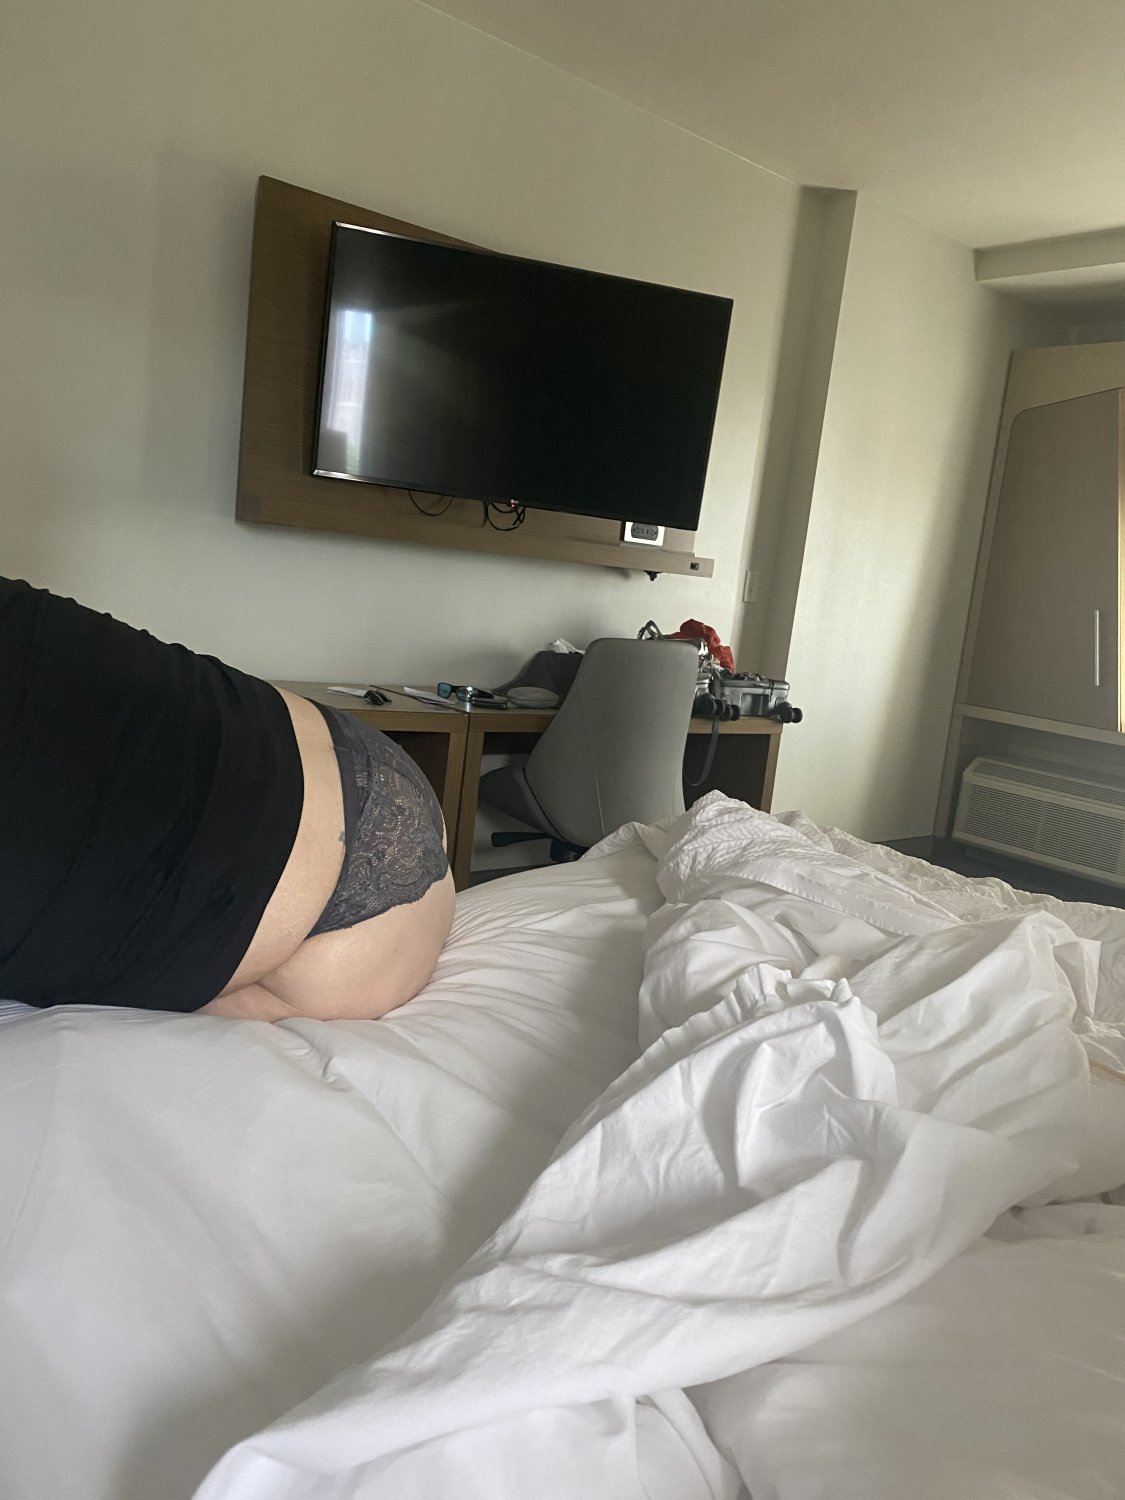 unaware wife in hotel room